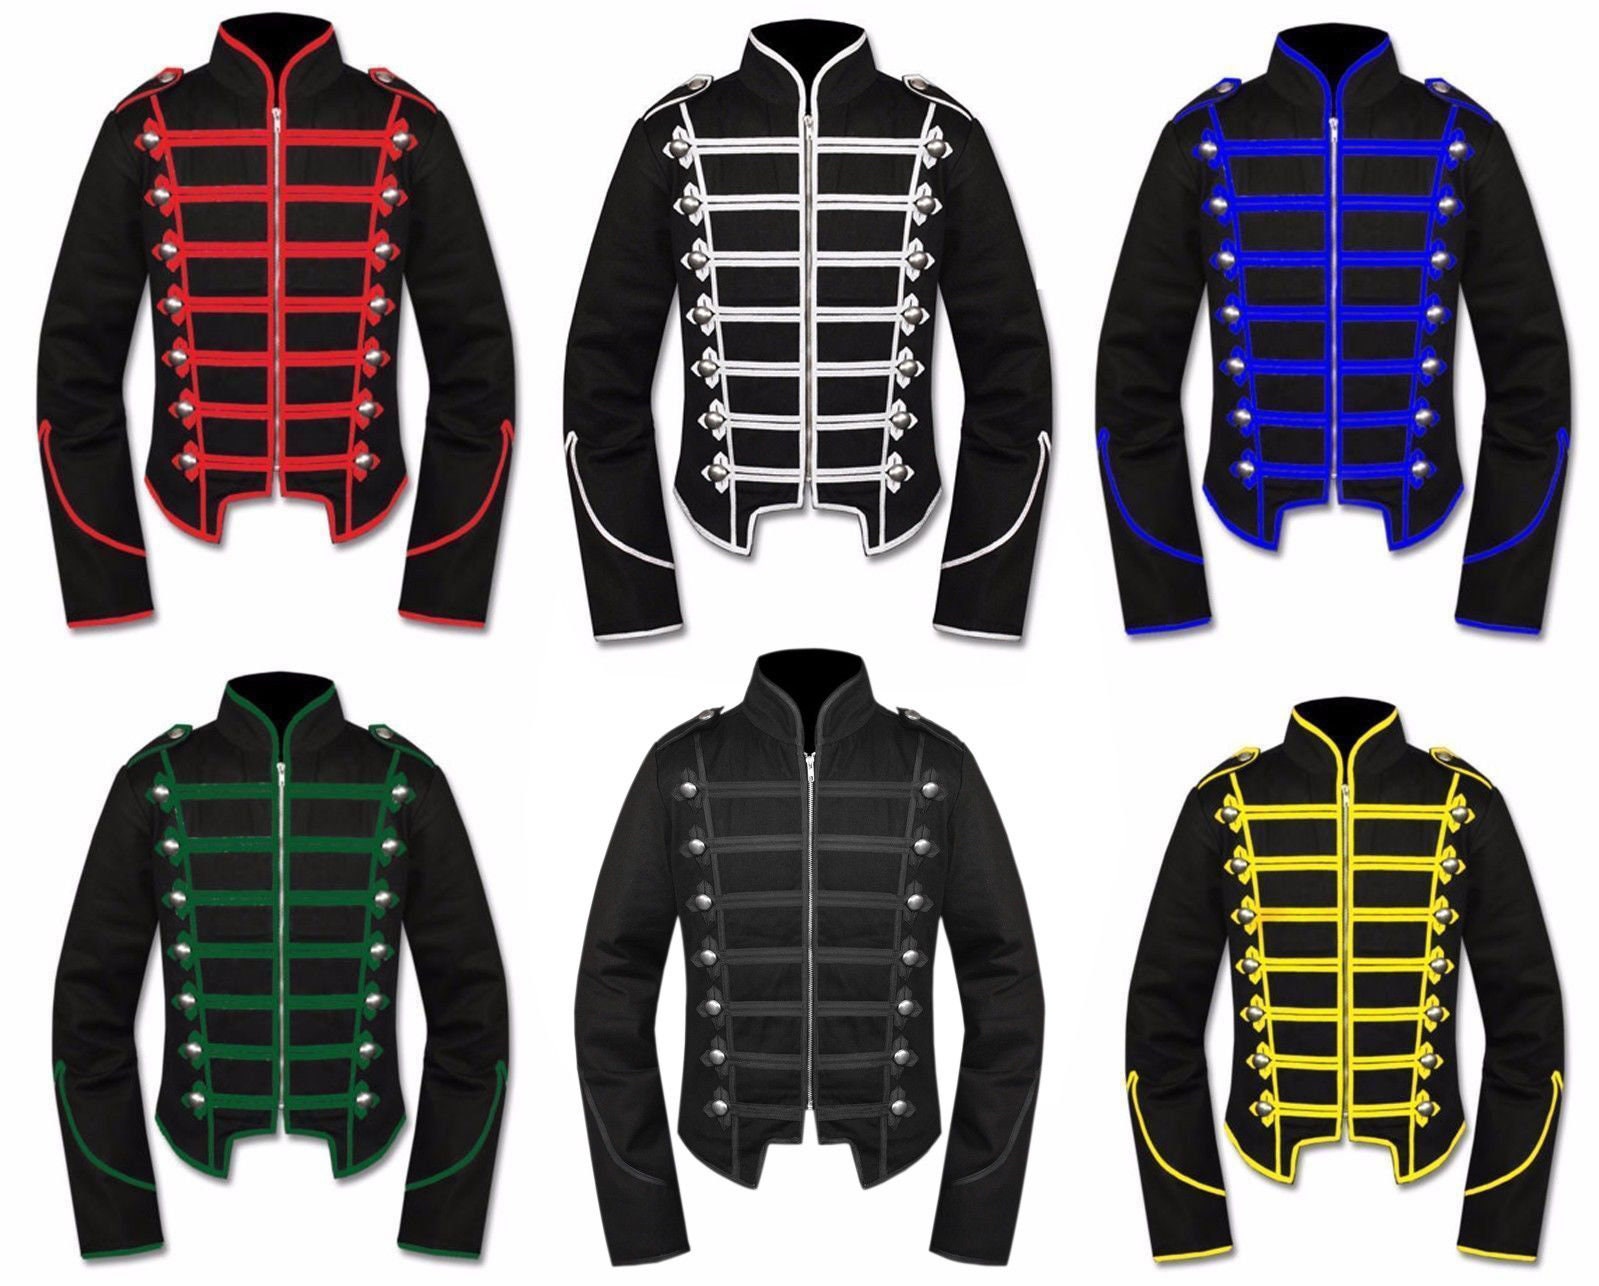 Military Drummer Jackets products for sale